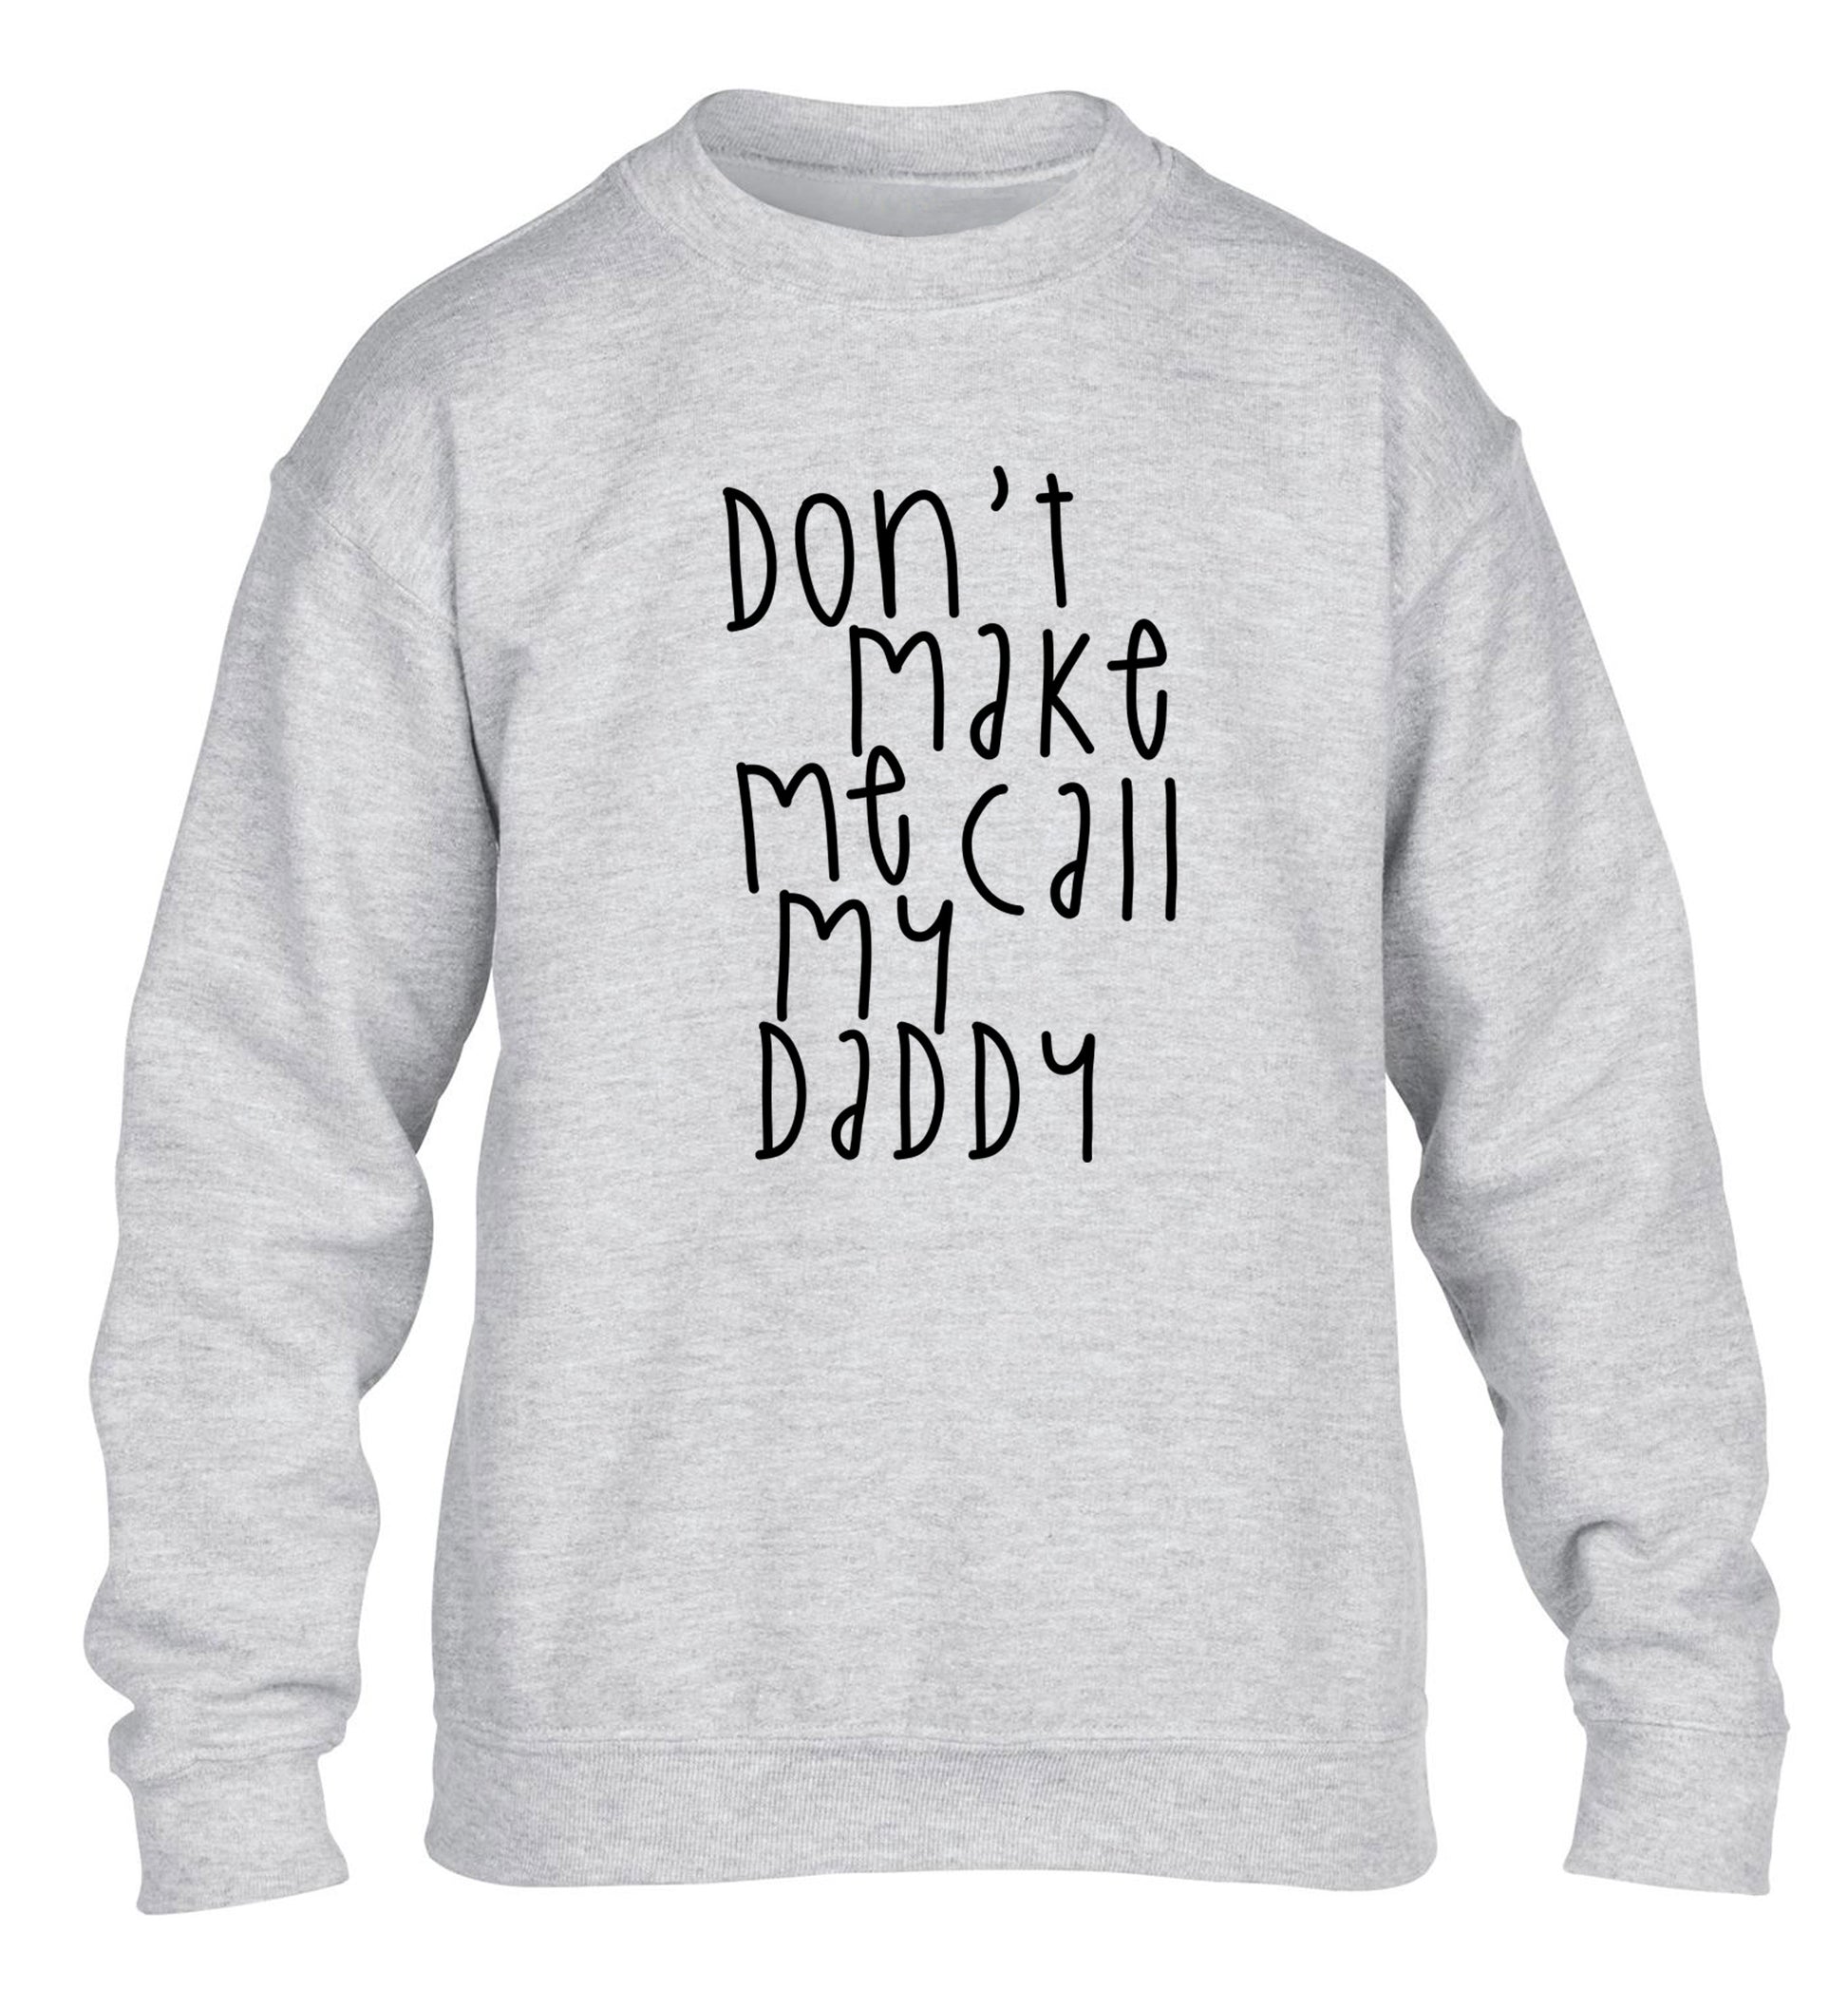 Don't make me call my daddy children's grey sweater 12-14 Years